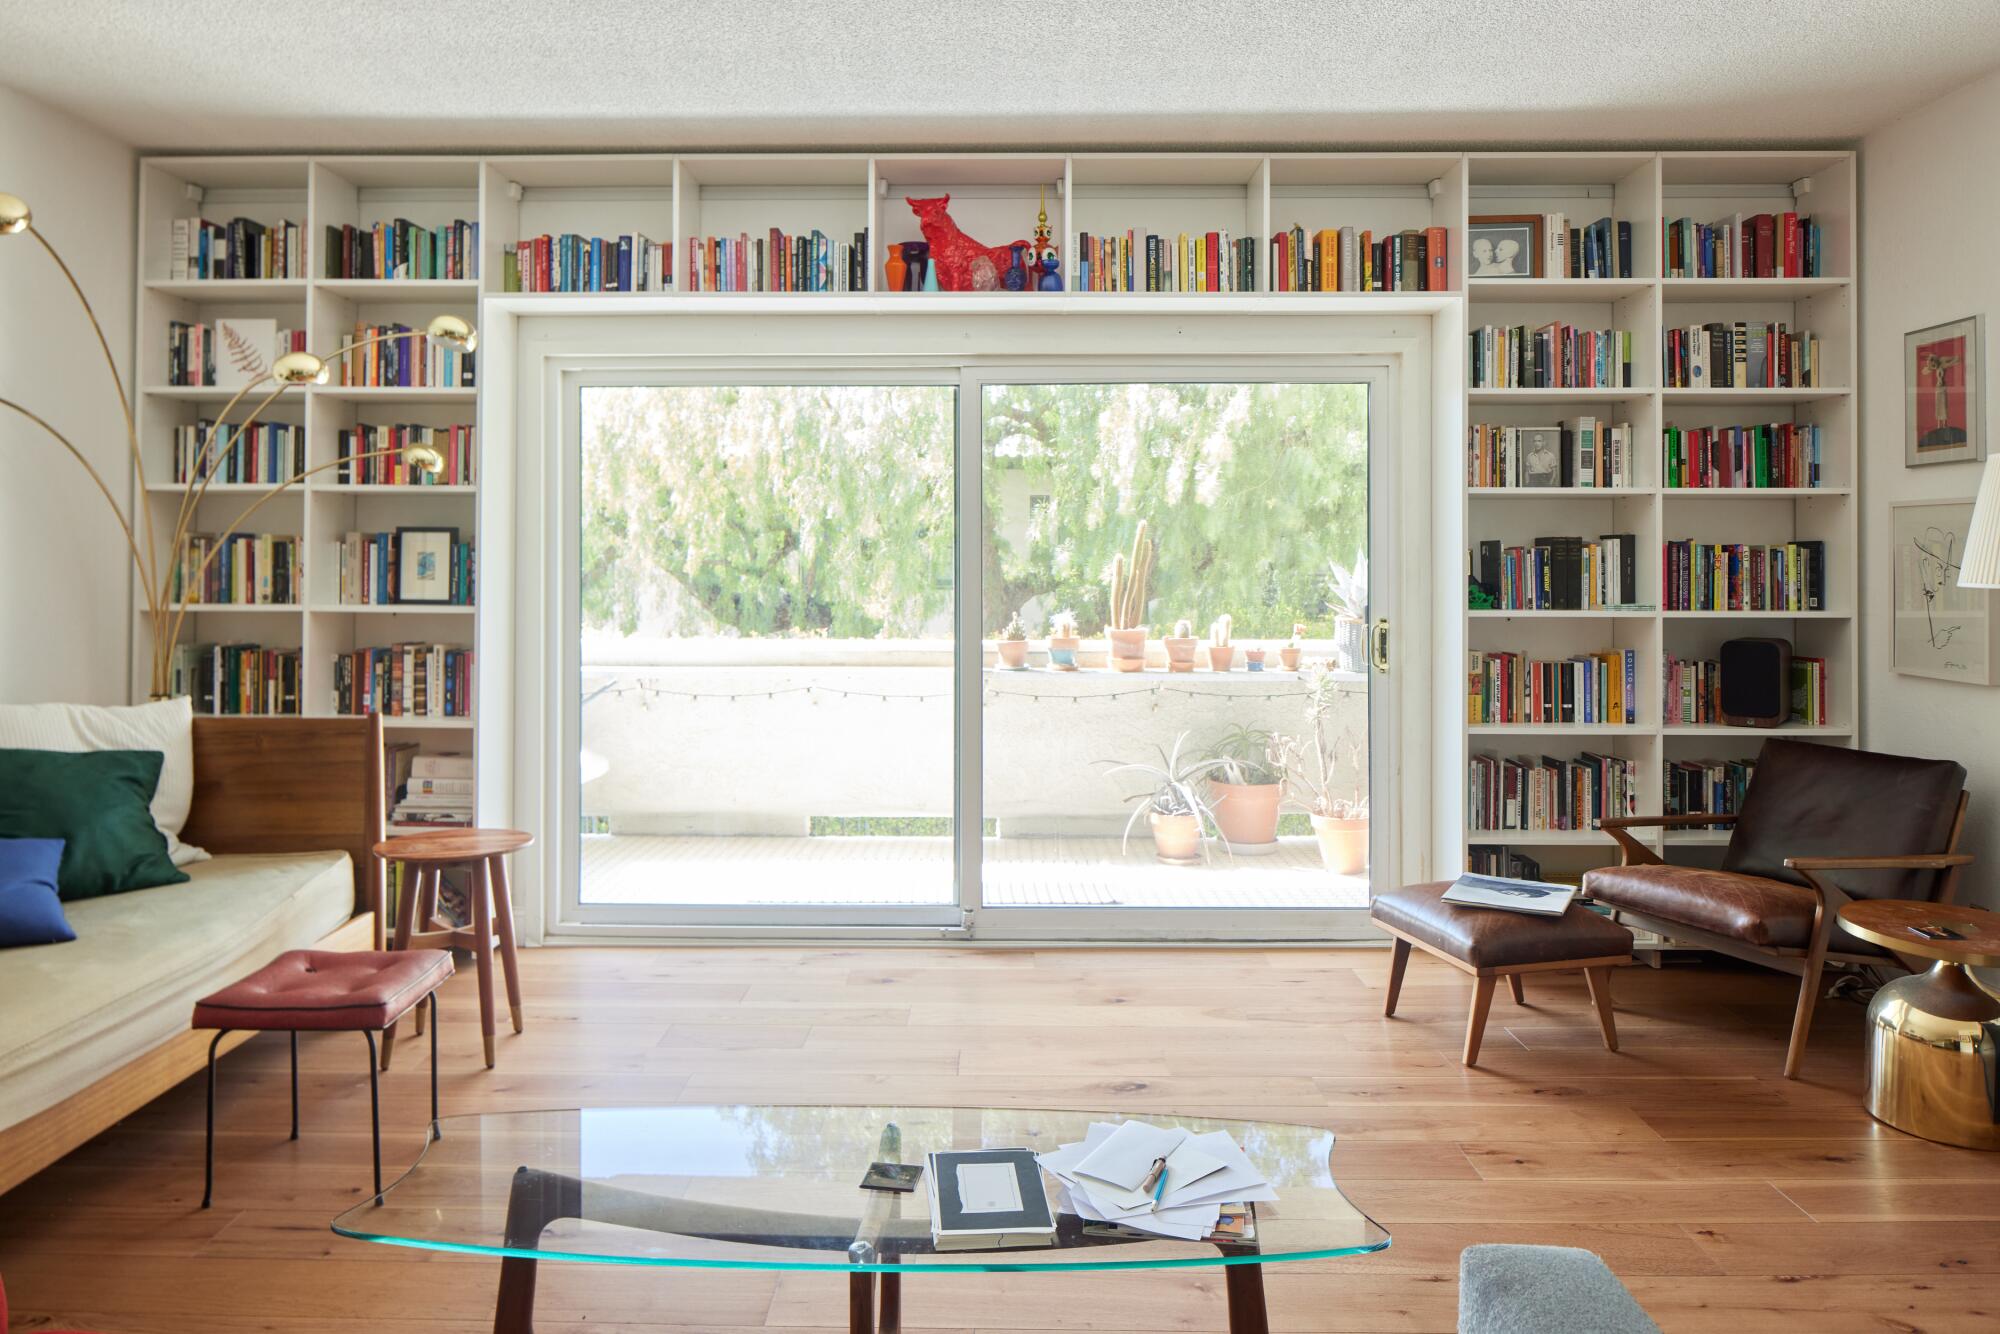 An image of a living room, a white book case framing the glass doors that go out to a patio.